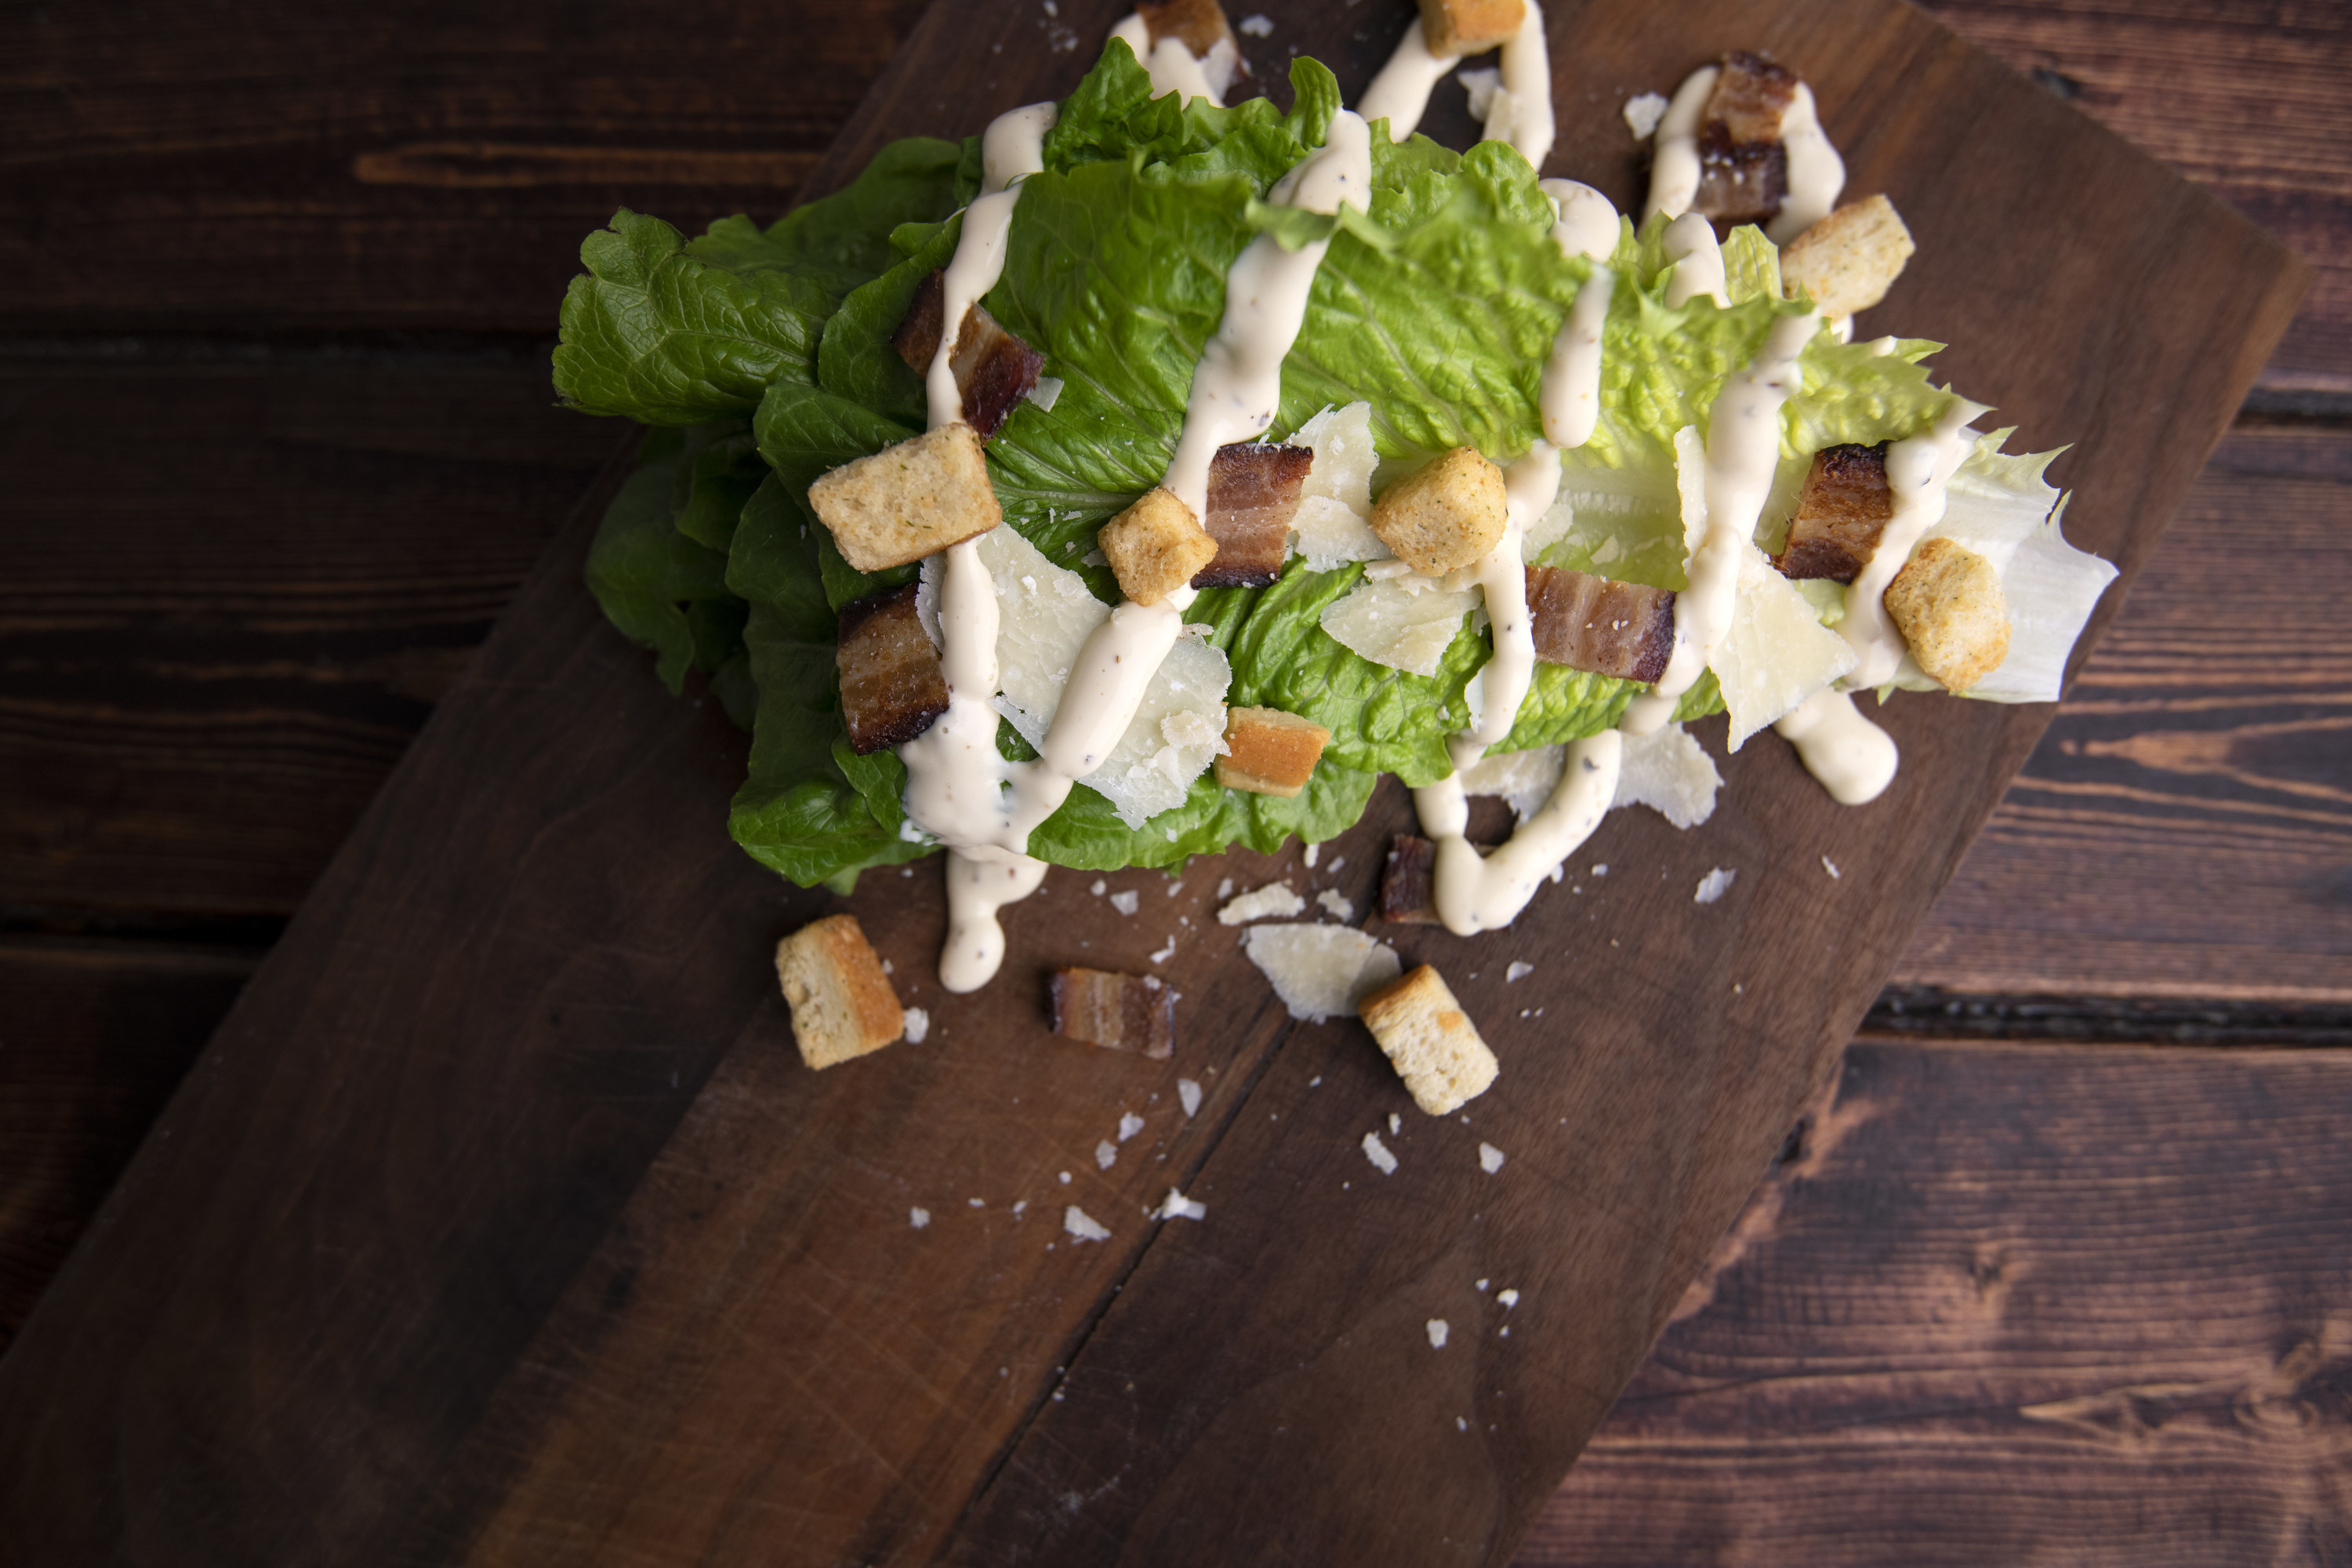 Salad leaves on a wooden cutting board sprinkled with croutons and drizzled with dressing